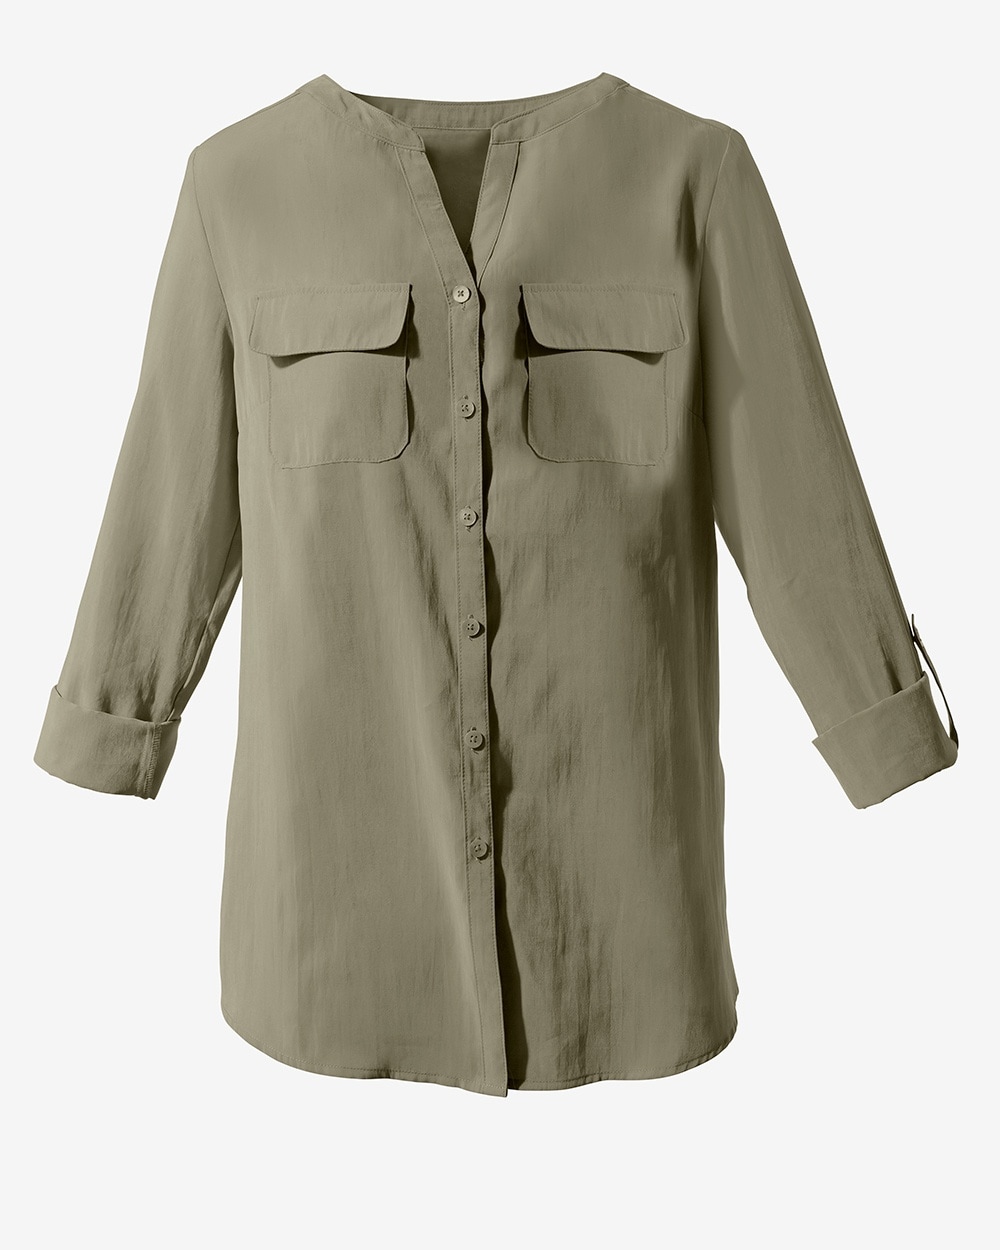 The Silky Chic Easy Utility Shirt